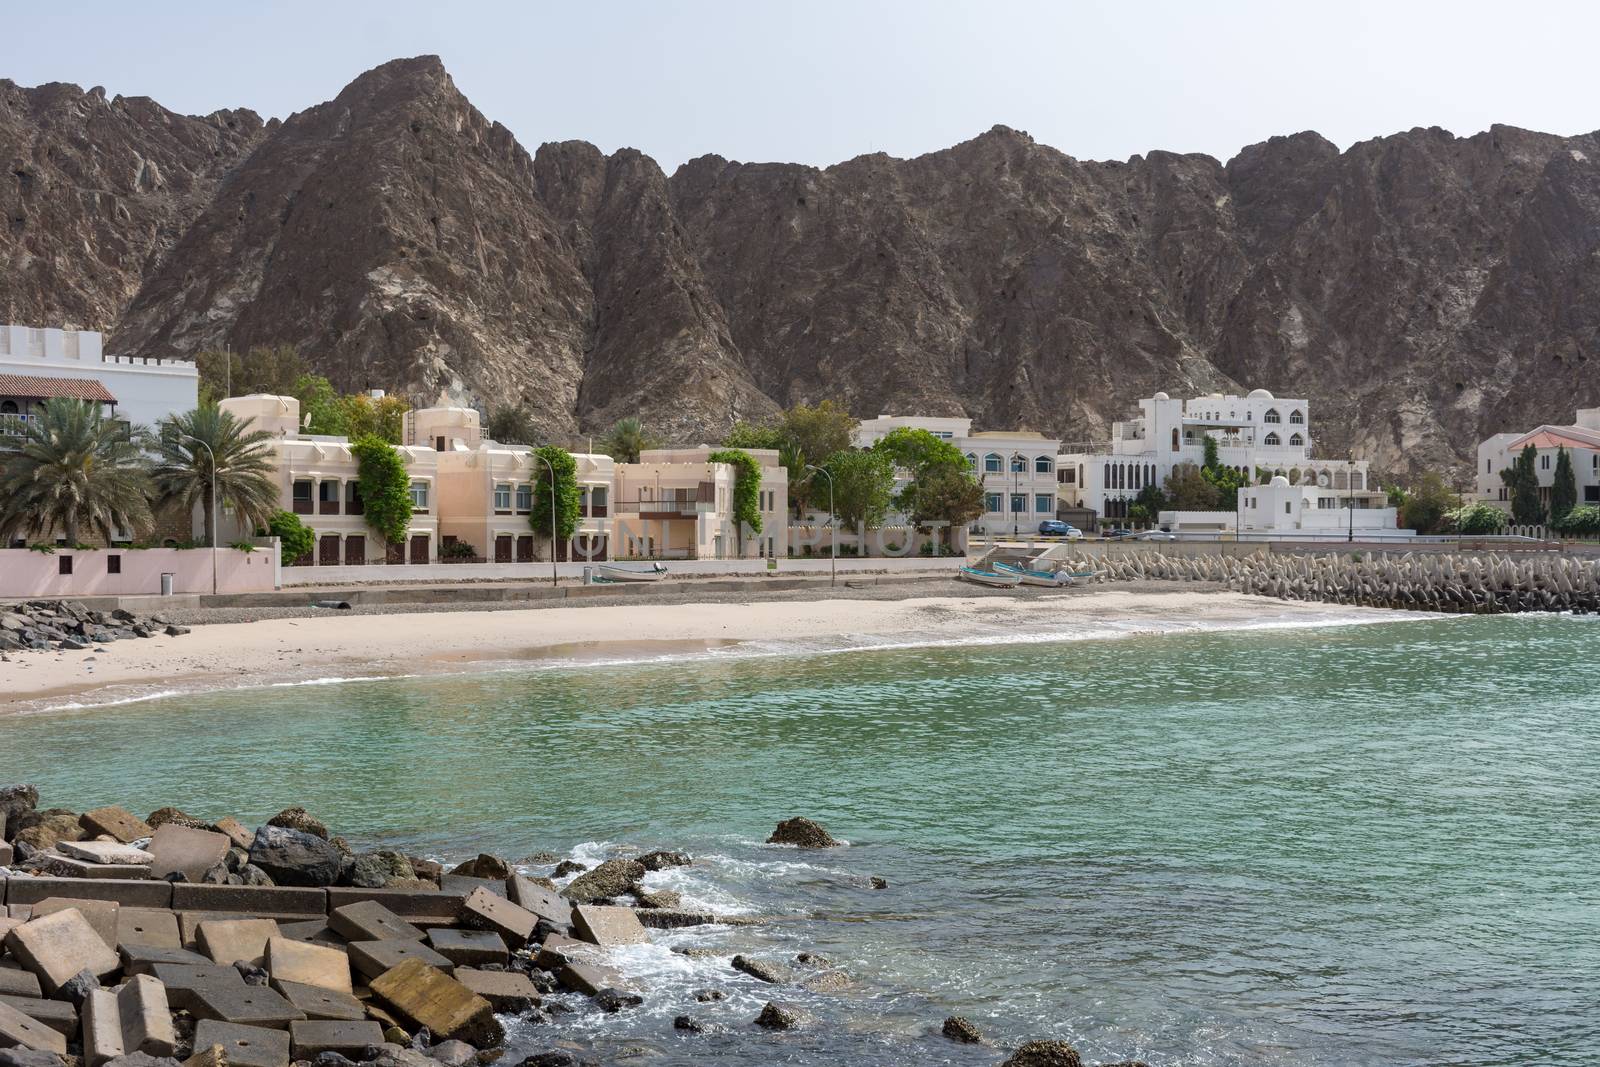 Spectacular Omani Coastline near Old Town in Muscat, Oman by the Corniche in the morning showing off the beautiful mountains and the Gulf of Oman.